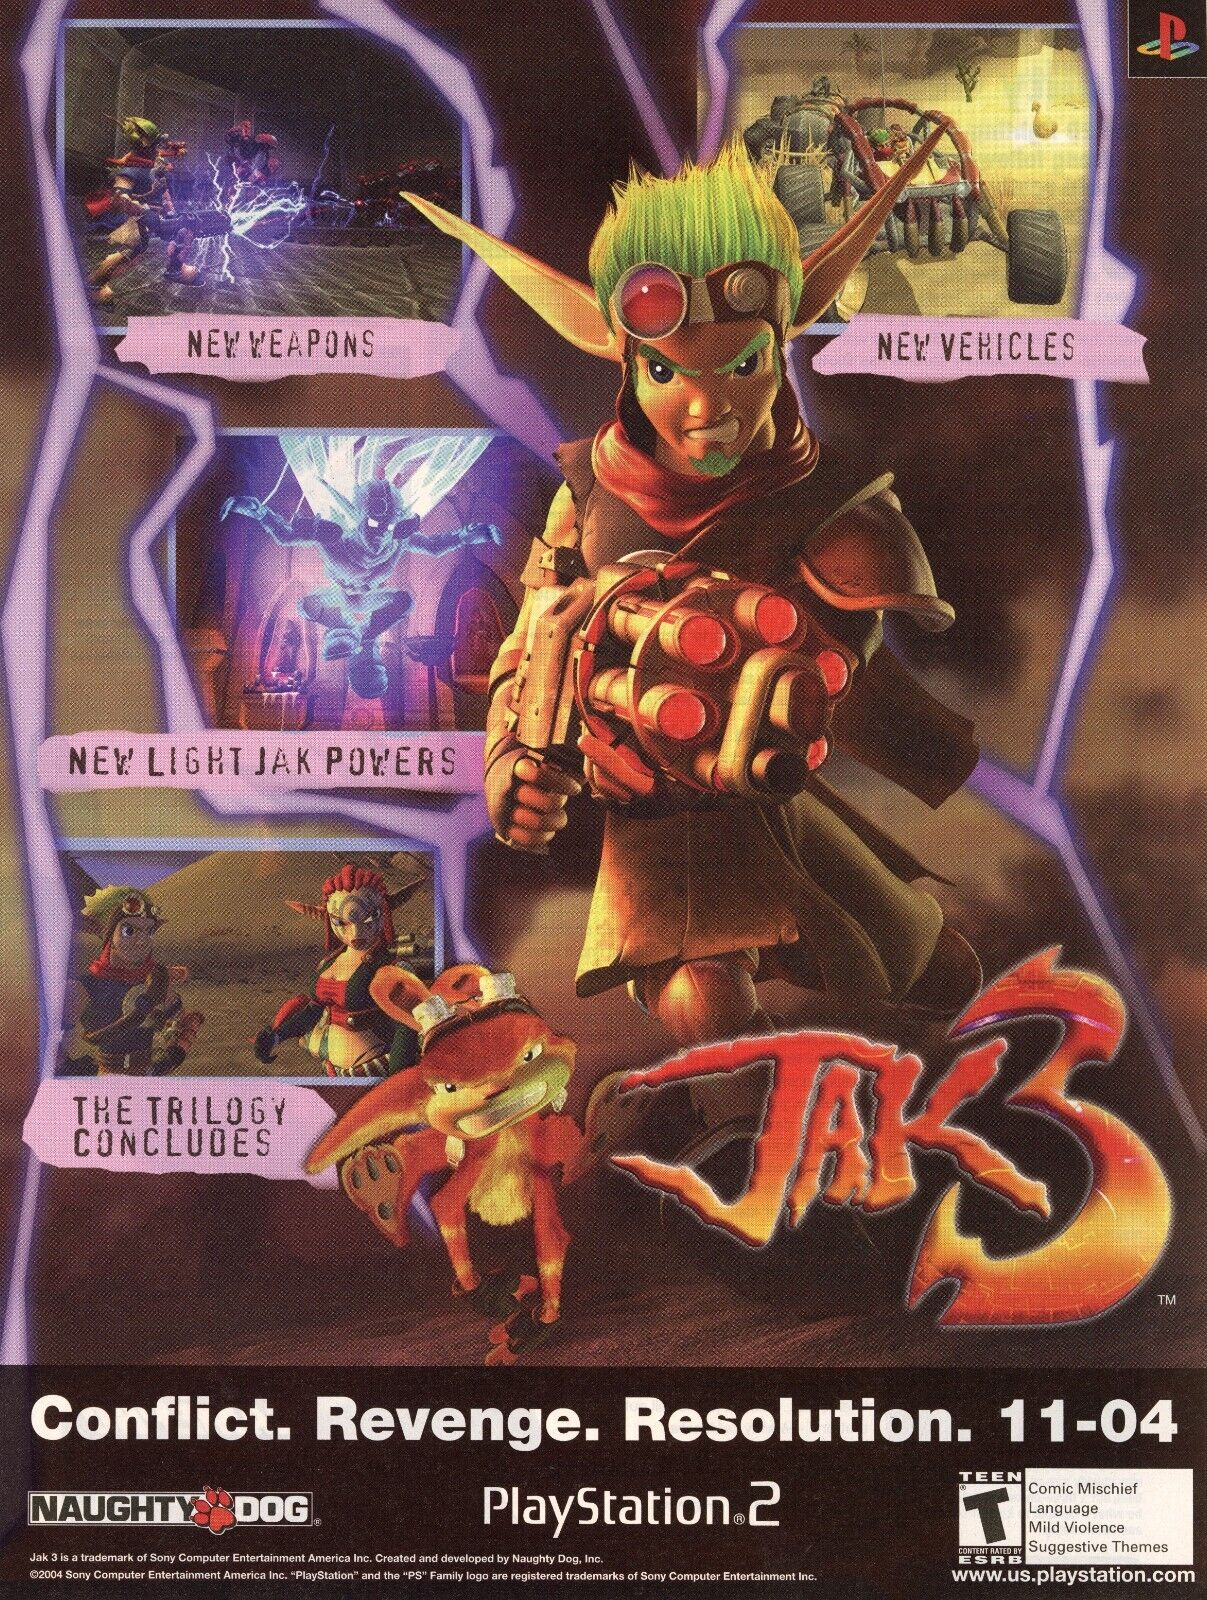 Jak 3 Playstation 2 PS2 2004 Promo Game Art Print Glossy Poster - And Daxter (B)